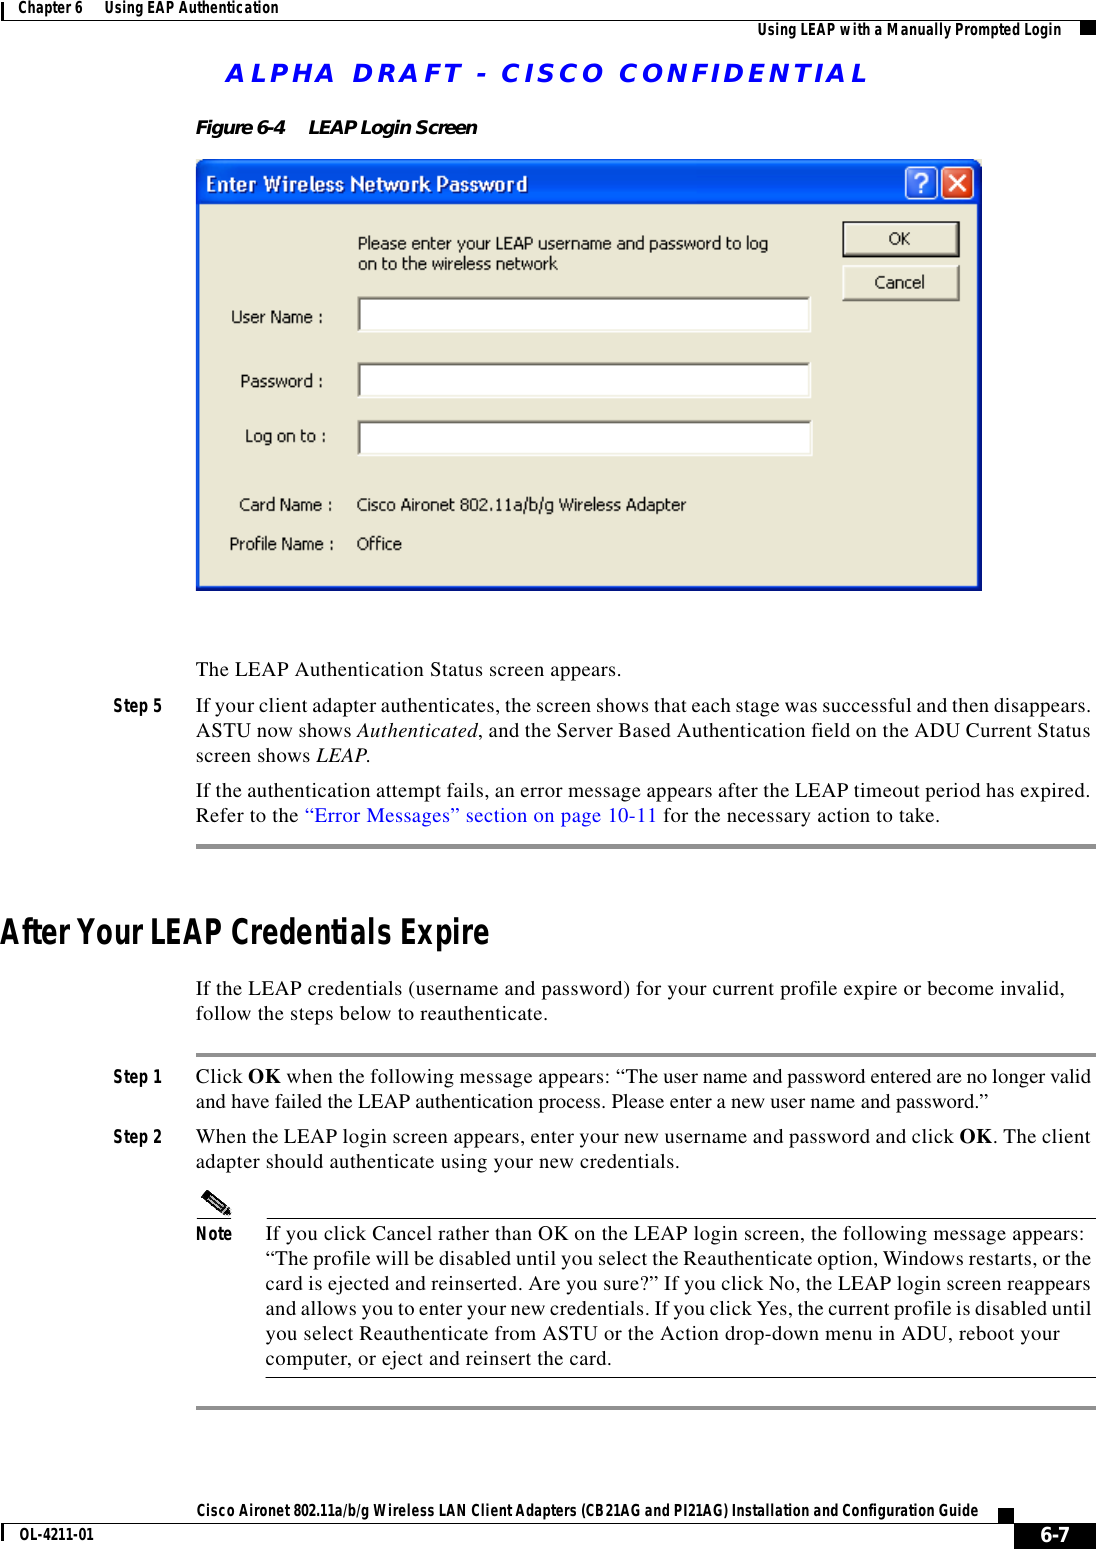 ALPHA DRAFT - CISCO CONFIDENTIAL6-7Cisco Aironet 802.11a/b/g Wireless LAN Client Adapters (CB21AG and PI21AG) Installation and Configuration GuideOL-4211-01Chapter 6      Using EAP Authentication Using LEAP with a Manually Prompted LoginFigure 6-4 LEAP Login ScreenThe LEAP Authentication Status screen appears.Step 5 If your client adapter authenticates, the screen shows that each stage was successful and then disappears. ASTU now shows Authenticated, and the Server Based Authentication field on the ADU Current Status screen shows LEAP.If the authentication attempt fails, an error message appears after the LEAP timeout period has expired. Refer to the “Error Messages” section on page 10-11 for the necessary action to take.After Your LEAP Credentials ExpireIf the LEAP credentials (username and password) for your current profile expire or become invalid, follow the steps below to reauthenticate.Step 1 Click OK when the following message appears: “The user name and password entered are no longer valid and have failed the LEAP authentication process. Please enter a new user name and password.”Step 2 When the LEAP login screen appears, enter your new username and password and click OK. The client adapter should authenticate using your new credentials.Note If you click Cancel rather than OK on the LEAP login screen, the following message appears: “The profile will be disabled until you select the Reauthenticate option, Windows restarts, or the card is ejected and reinserted. Are you sure?” If you click No, the LEAP login screen reappears and allows you to enter your new credentials. If you click Yes, the current profile is disabled until you select Reauthenticate from ASTU or the Action drop-down menu in ADU, reboot your computer, or eject and reinsert the card.